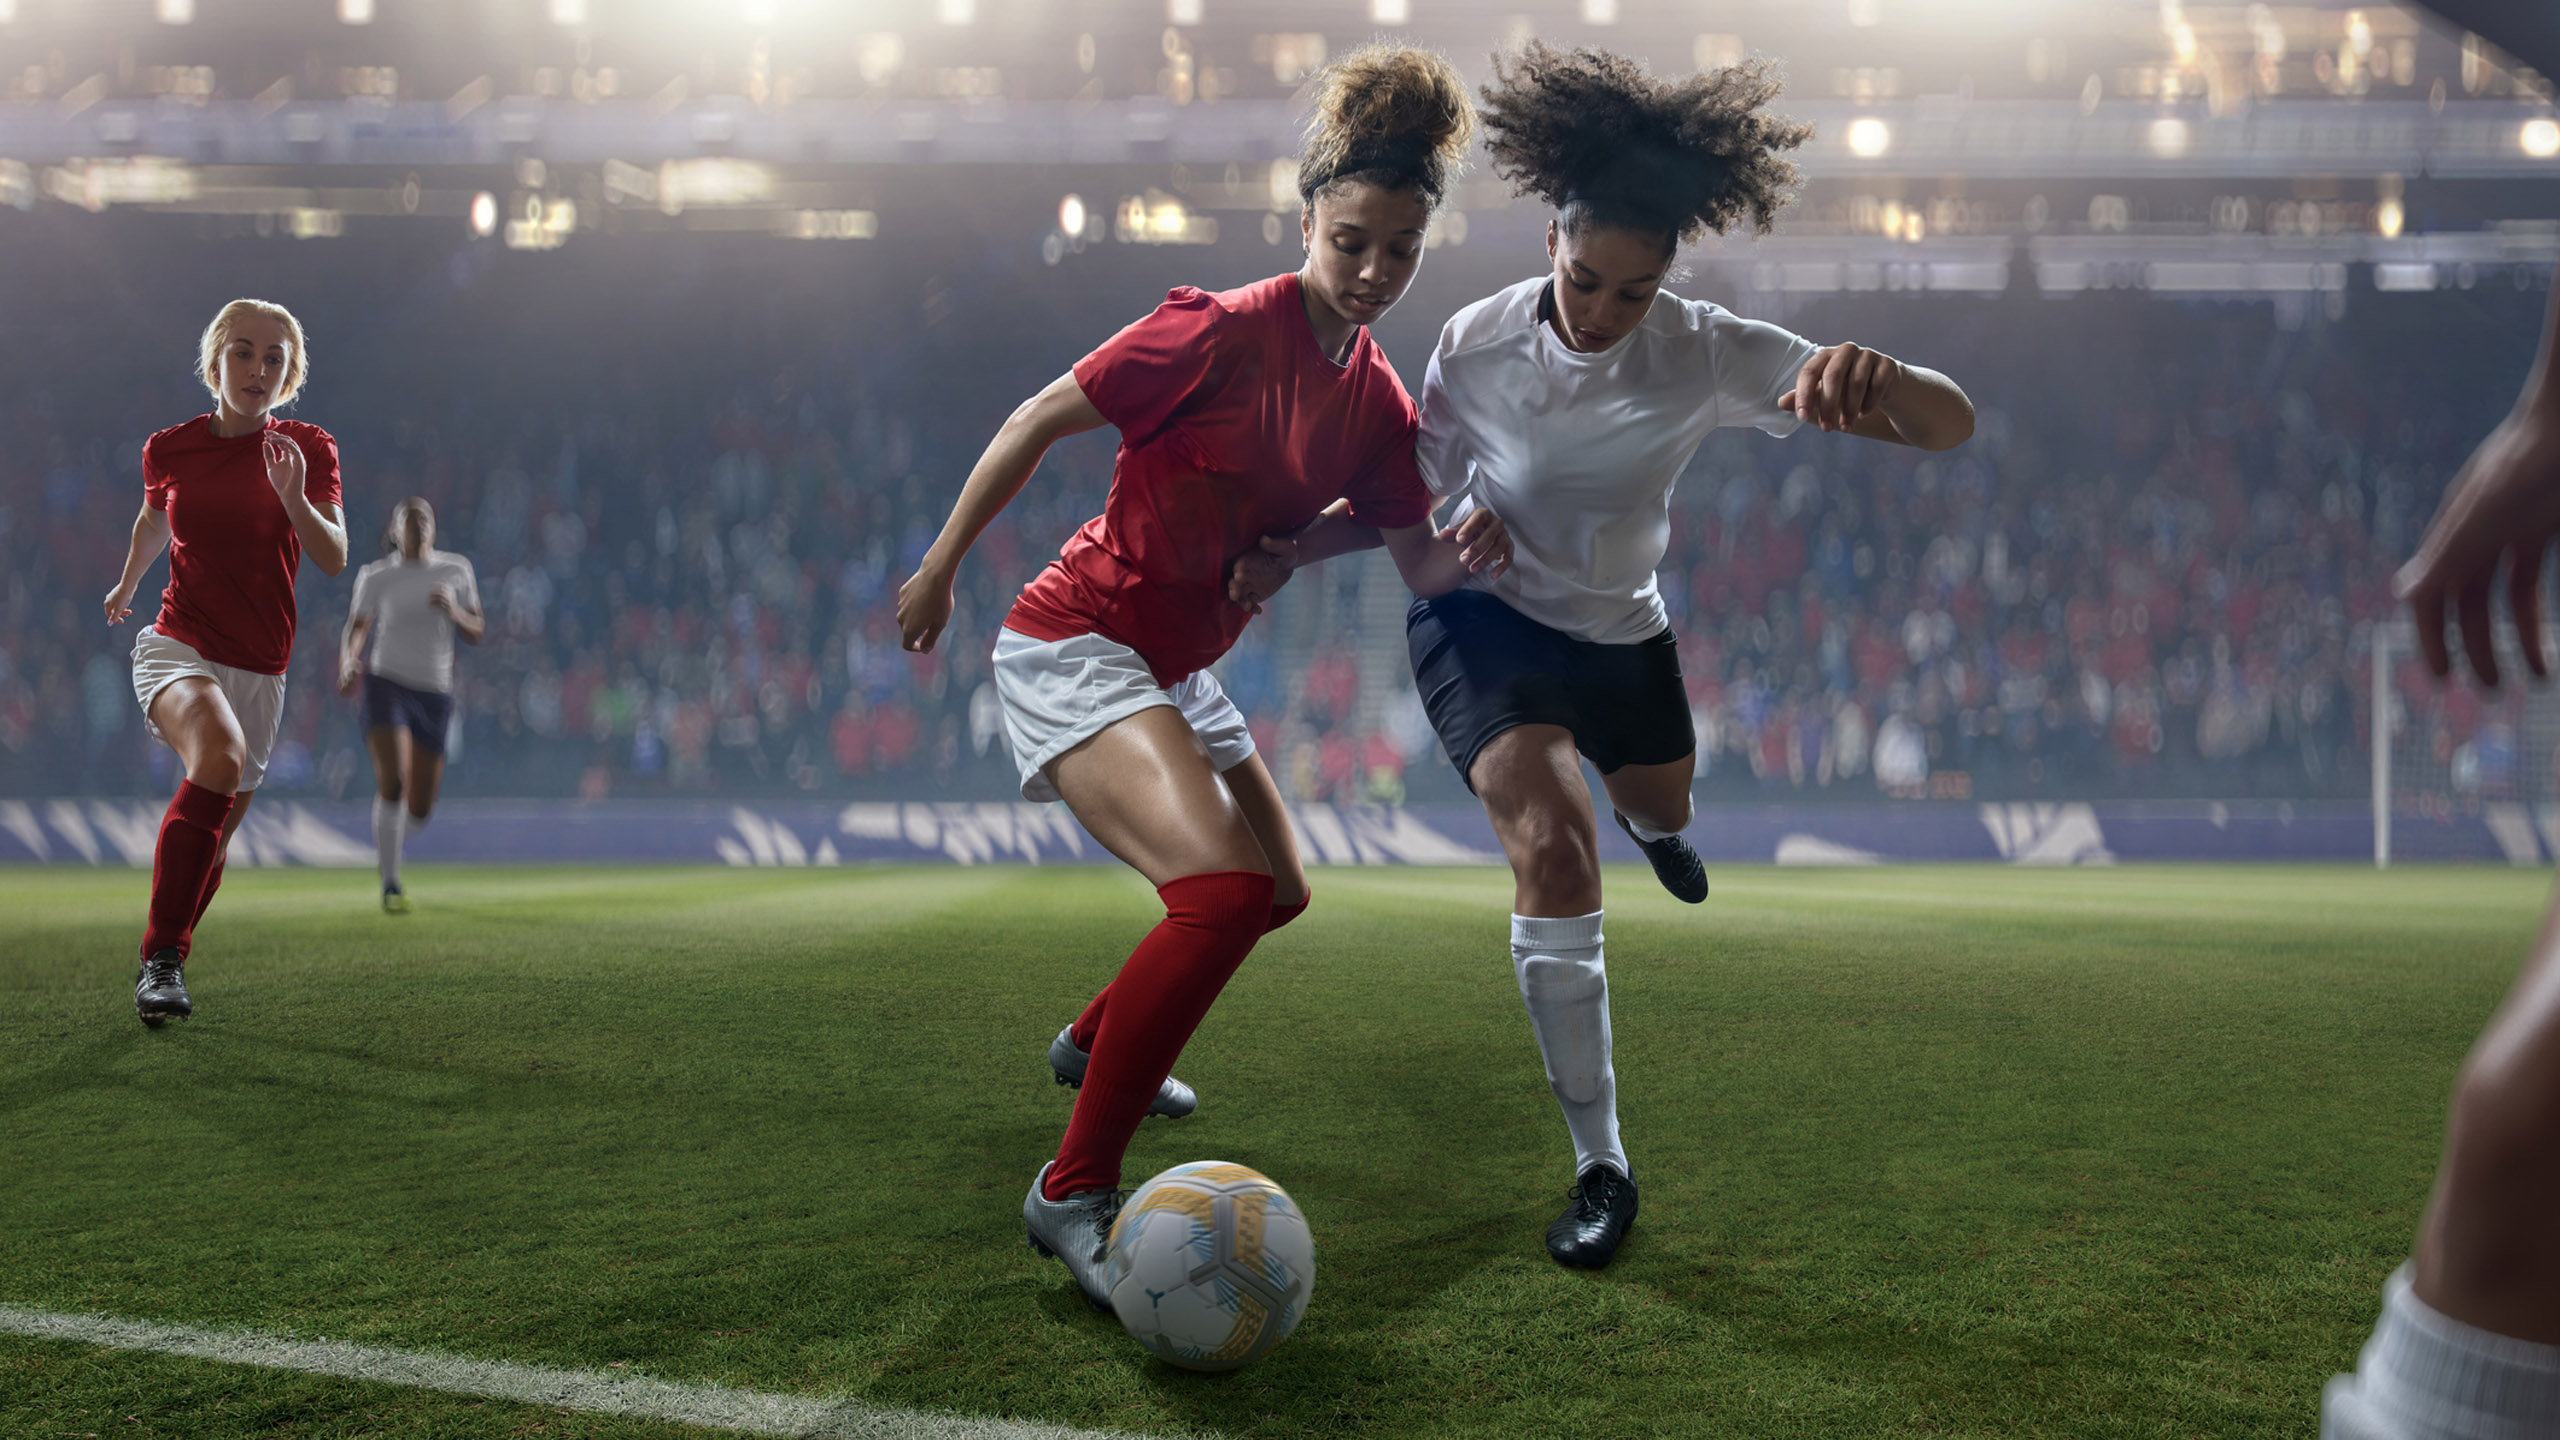 The Concussion Gender Gap: Why Girls Suffer More Head Injuries